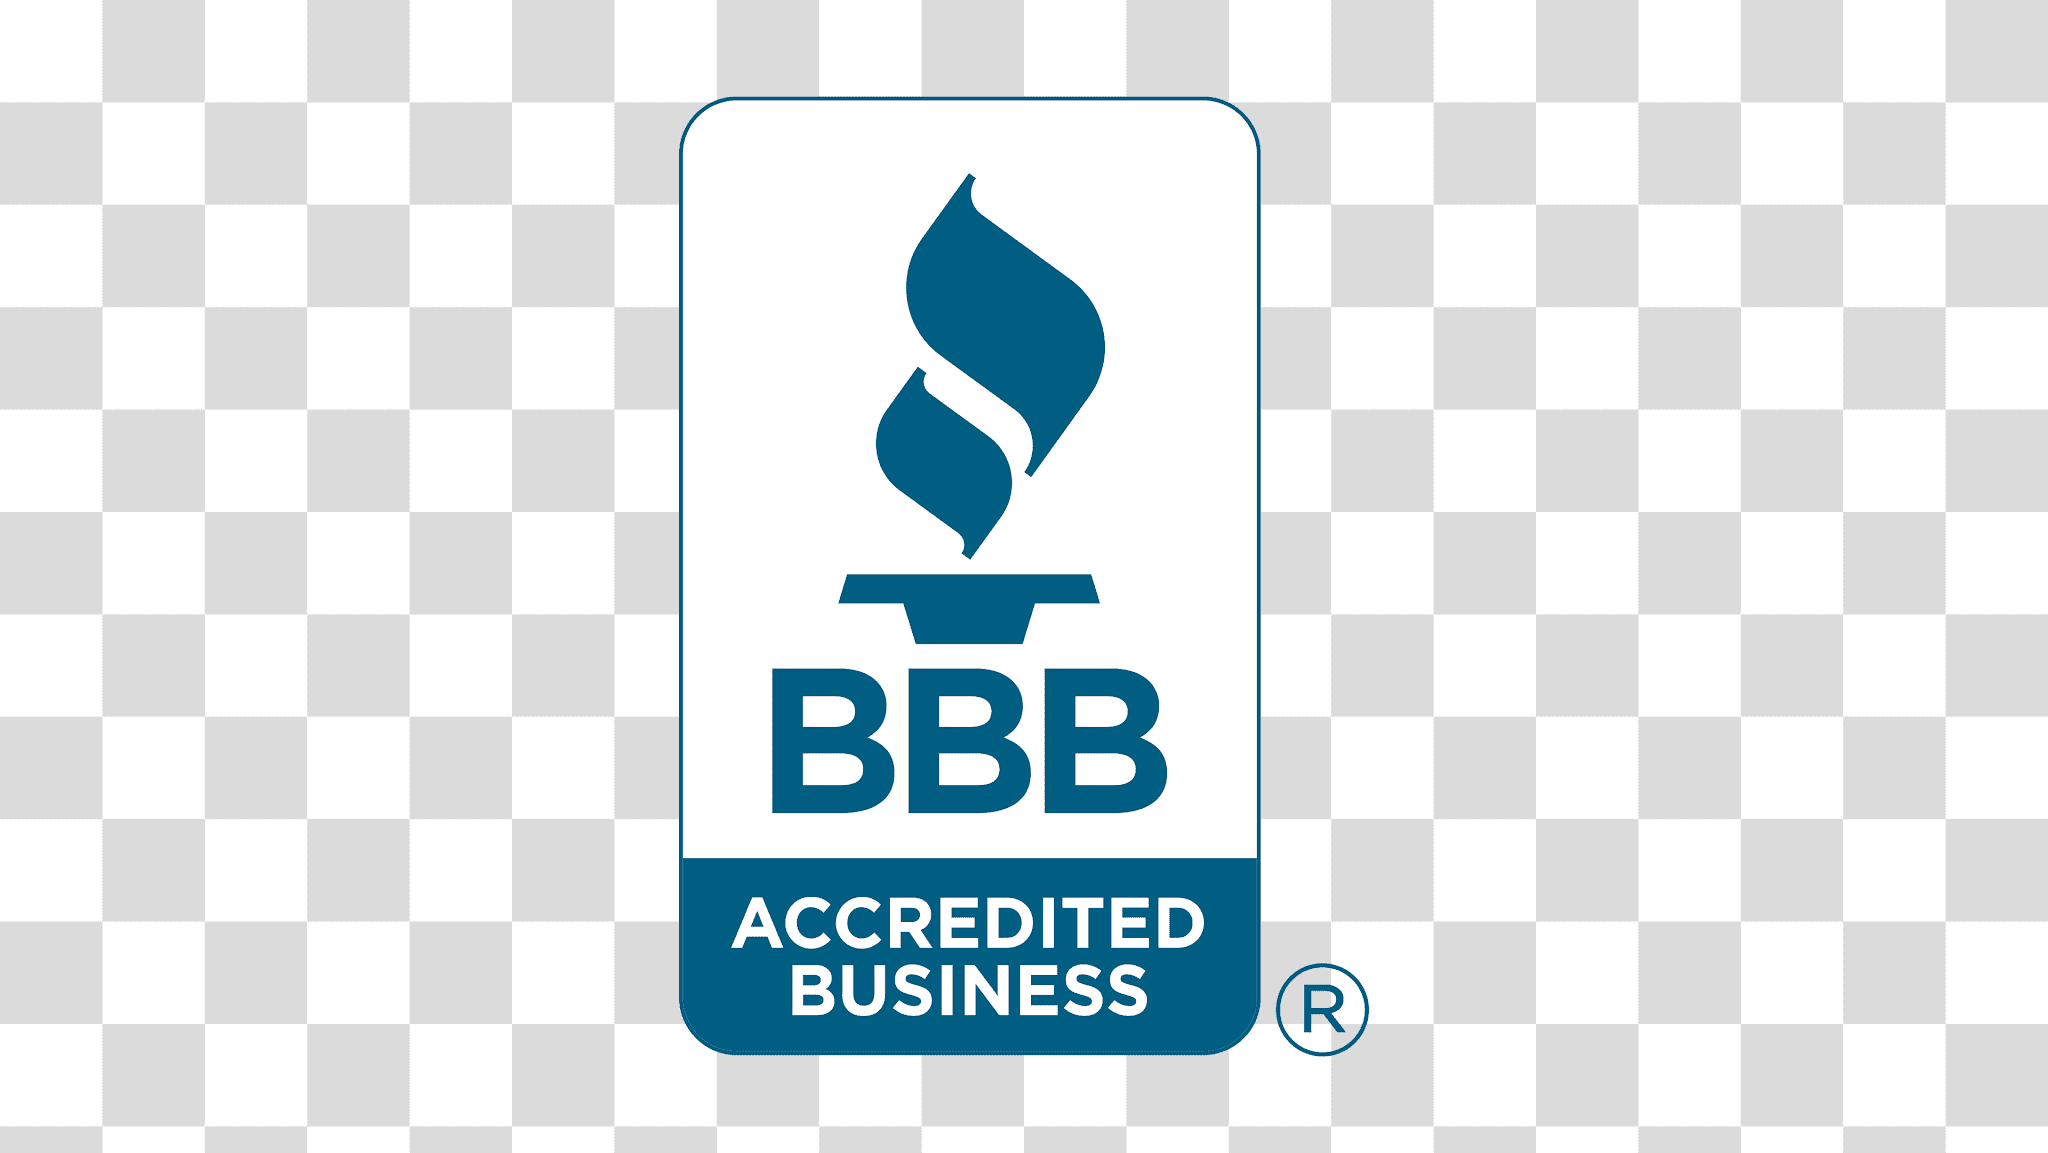 BBB Accredited Business Seal PNG Transparent Image